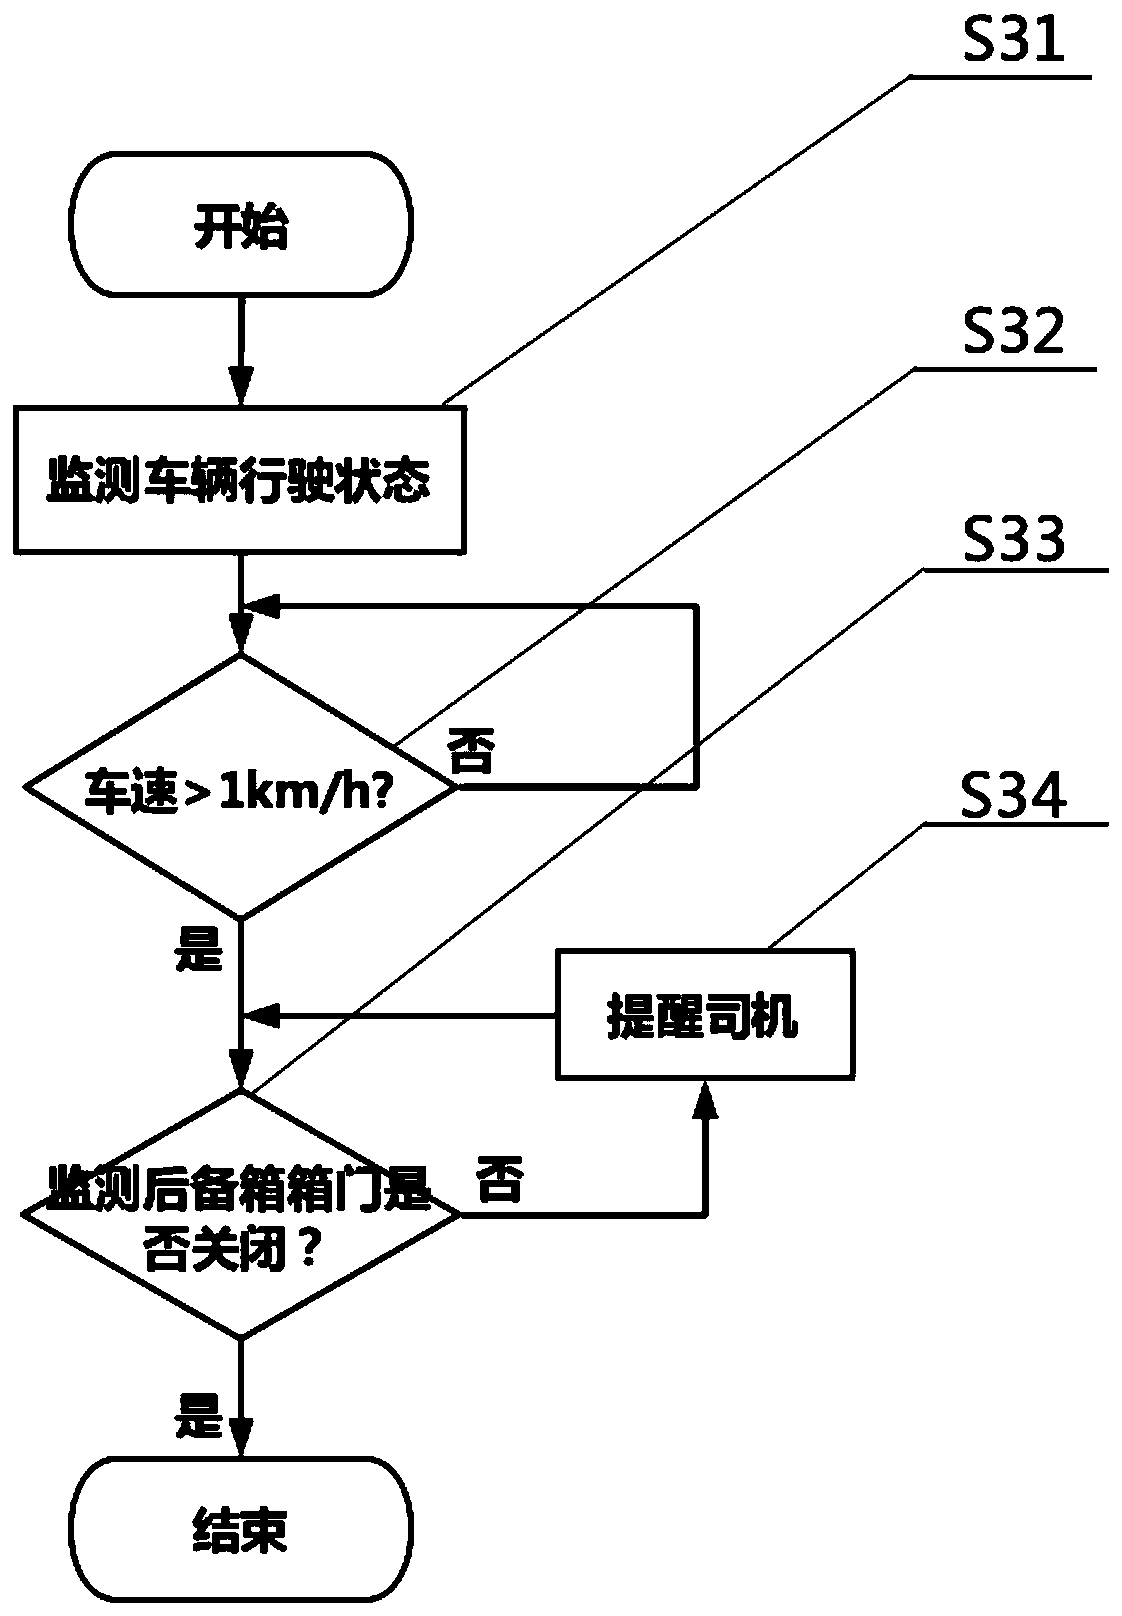 Taxi violation automatic reminder system and method